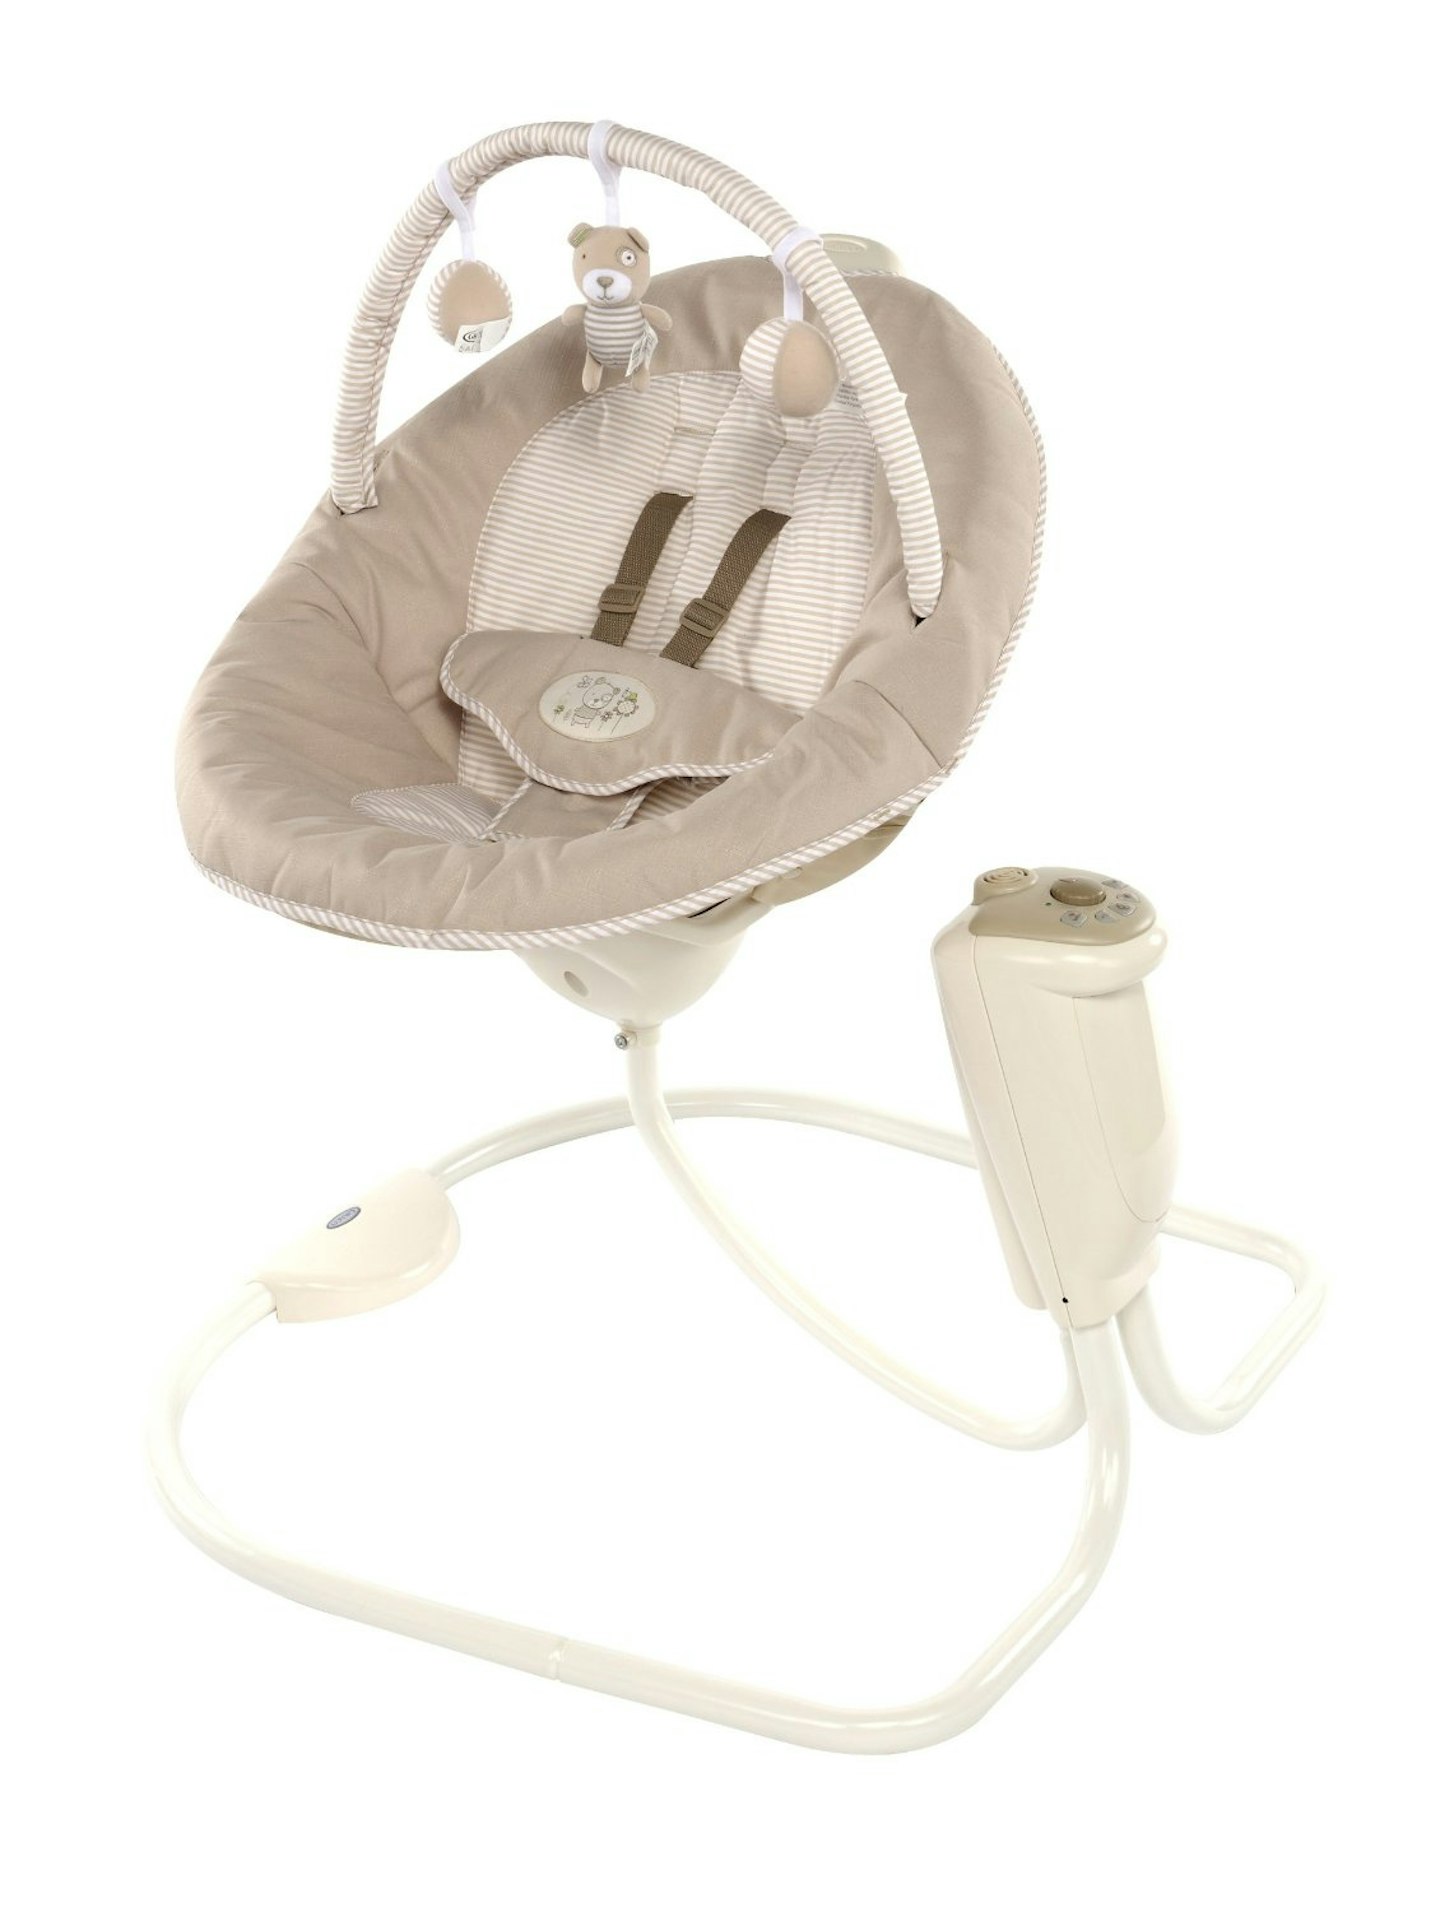 Graco Snuggle Swing review